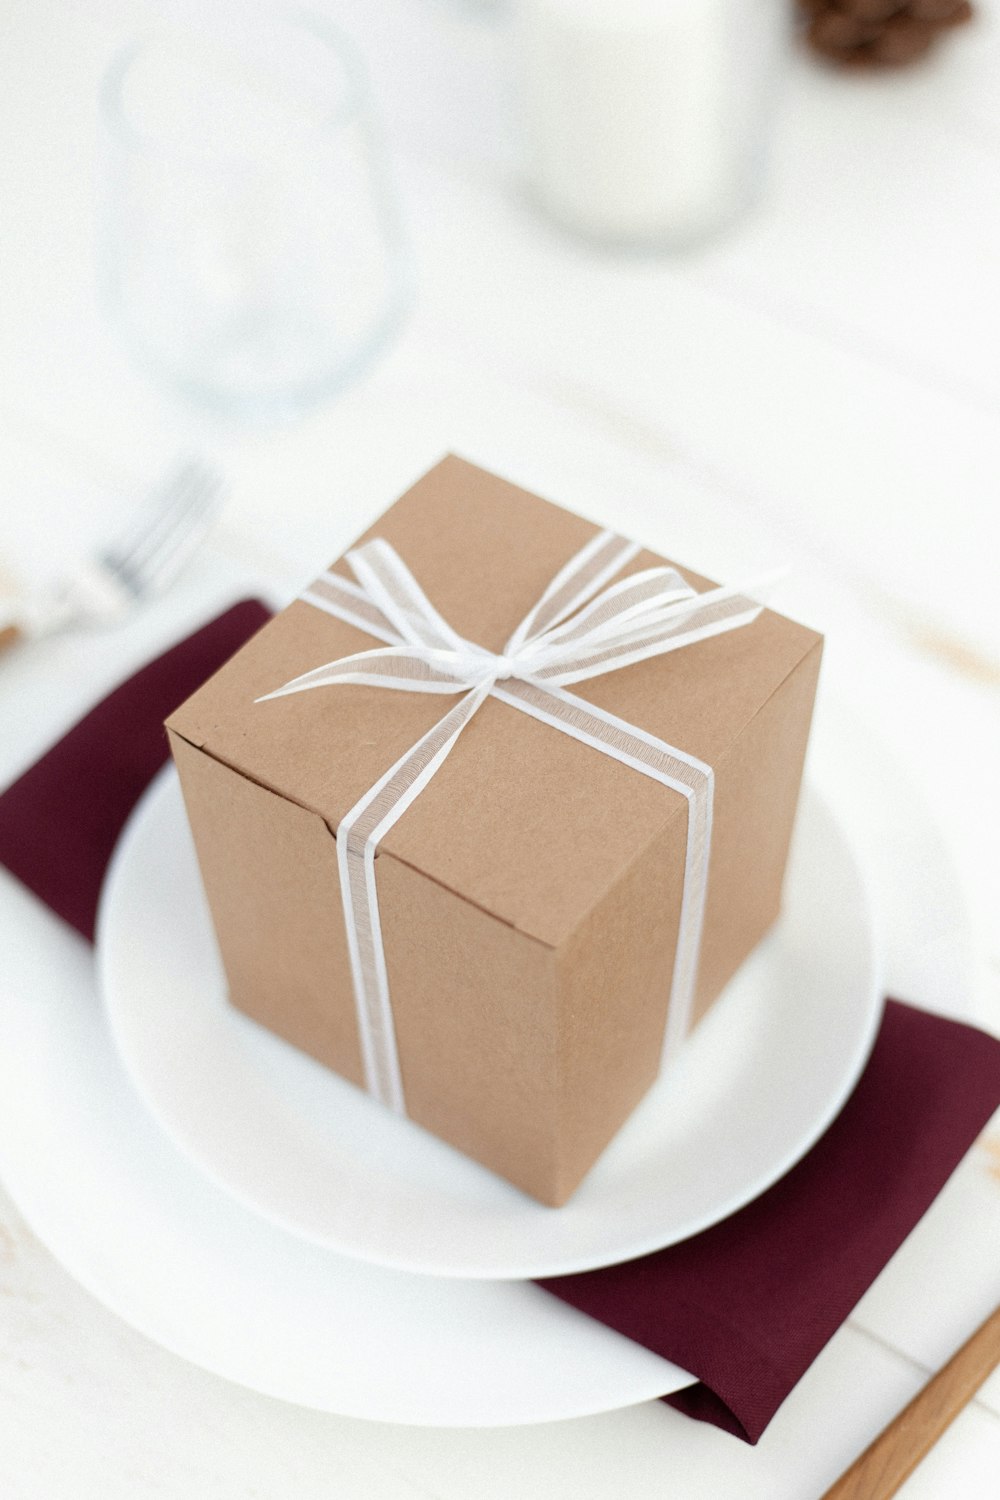 brown and white box on white ceramic plate